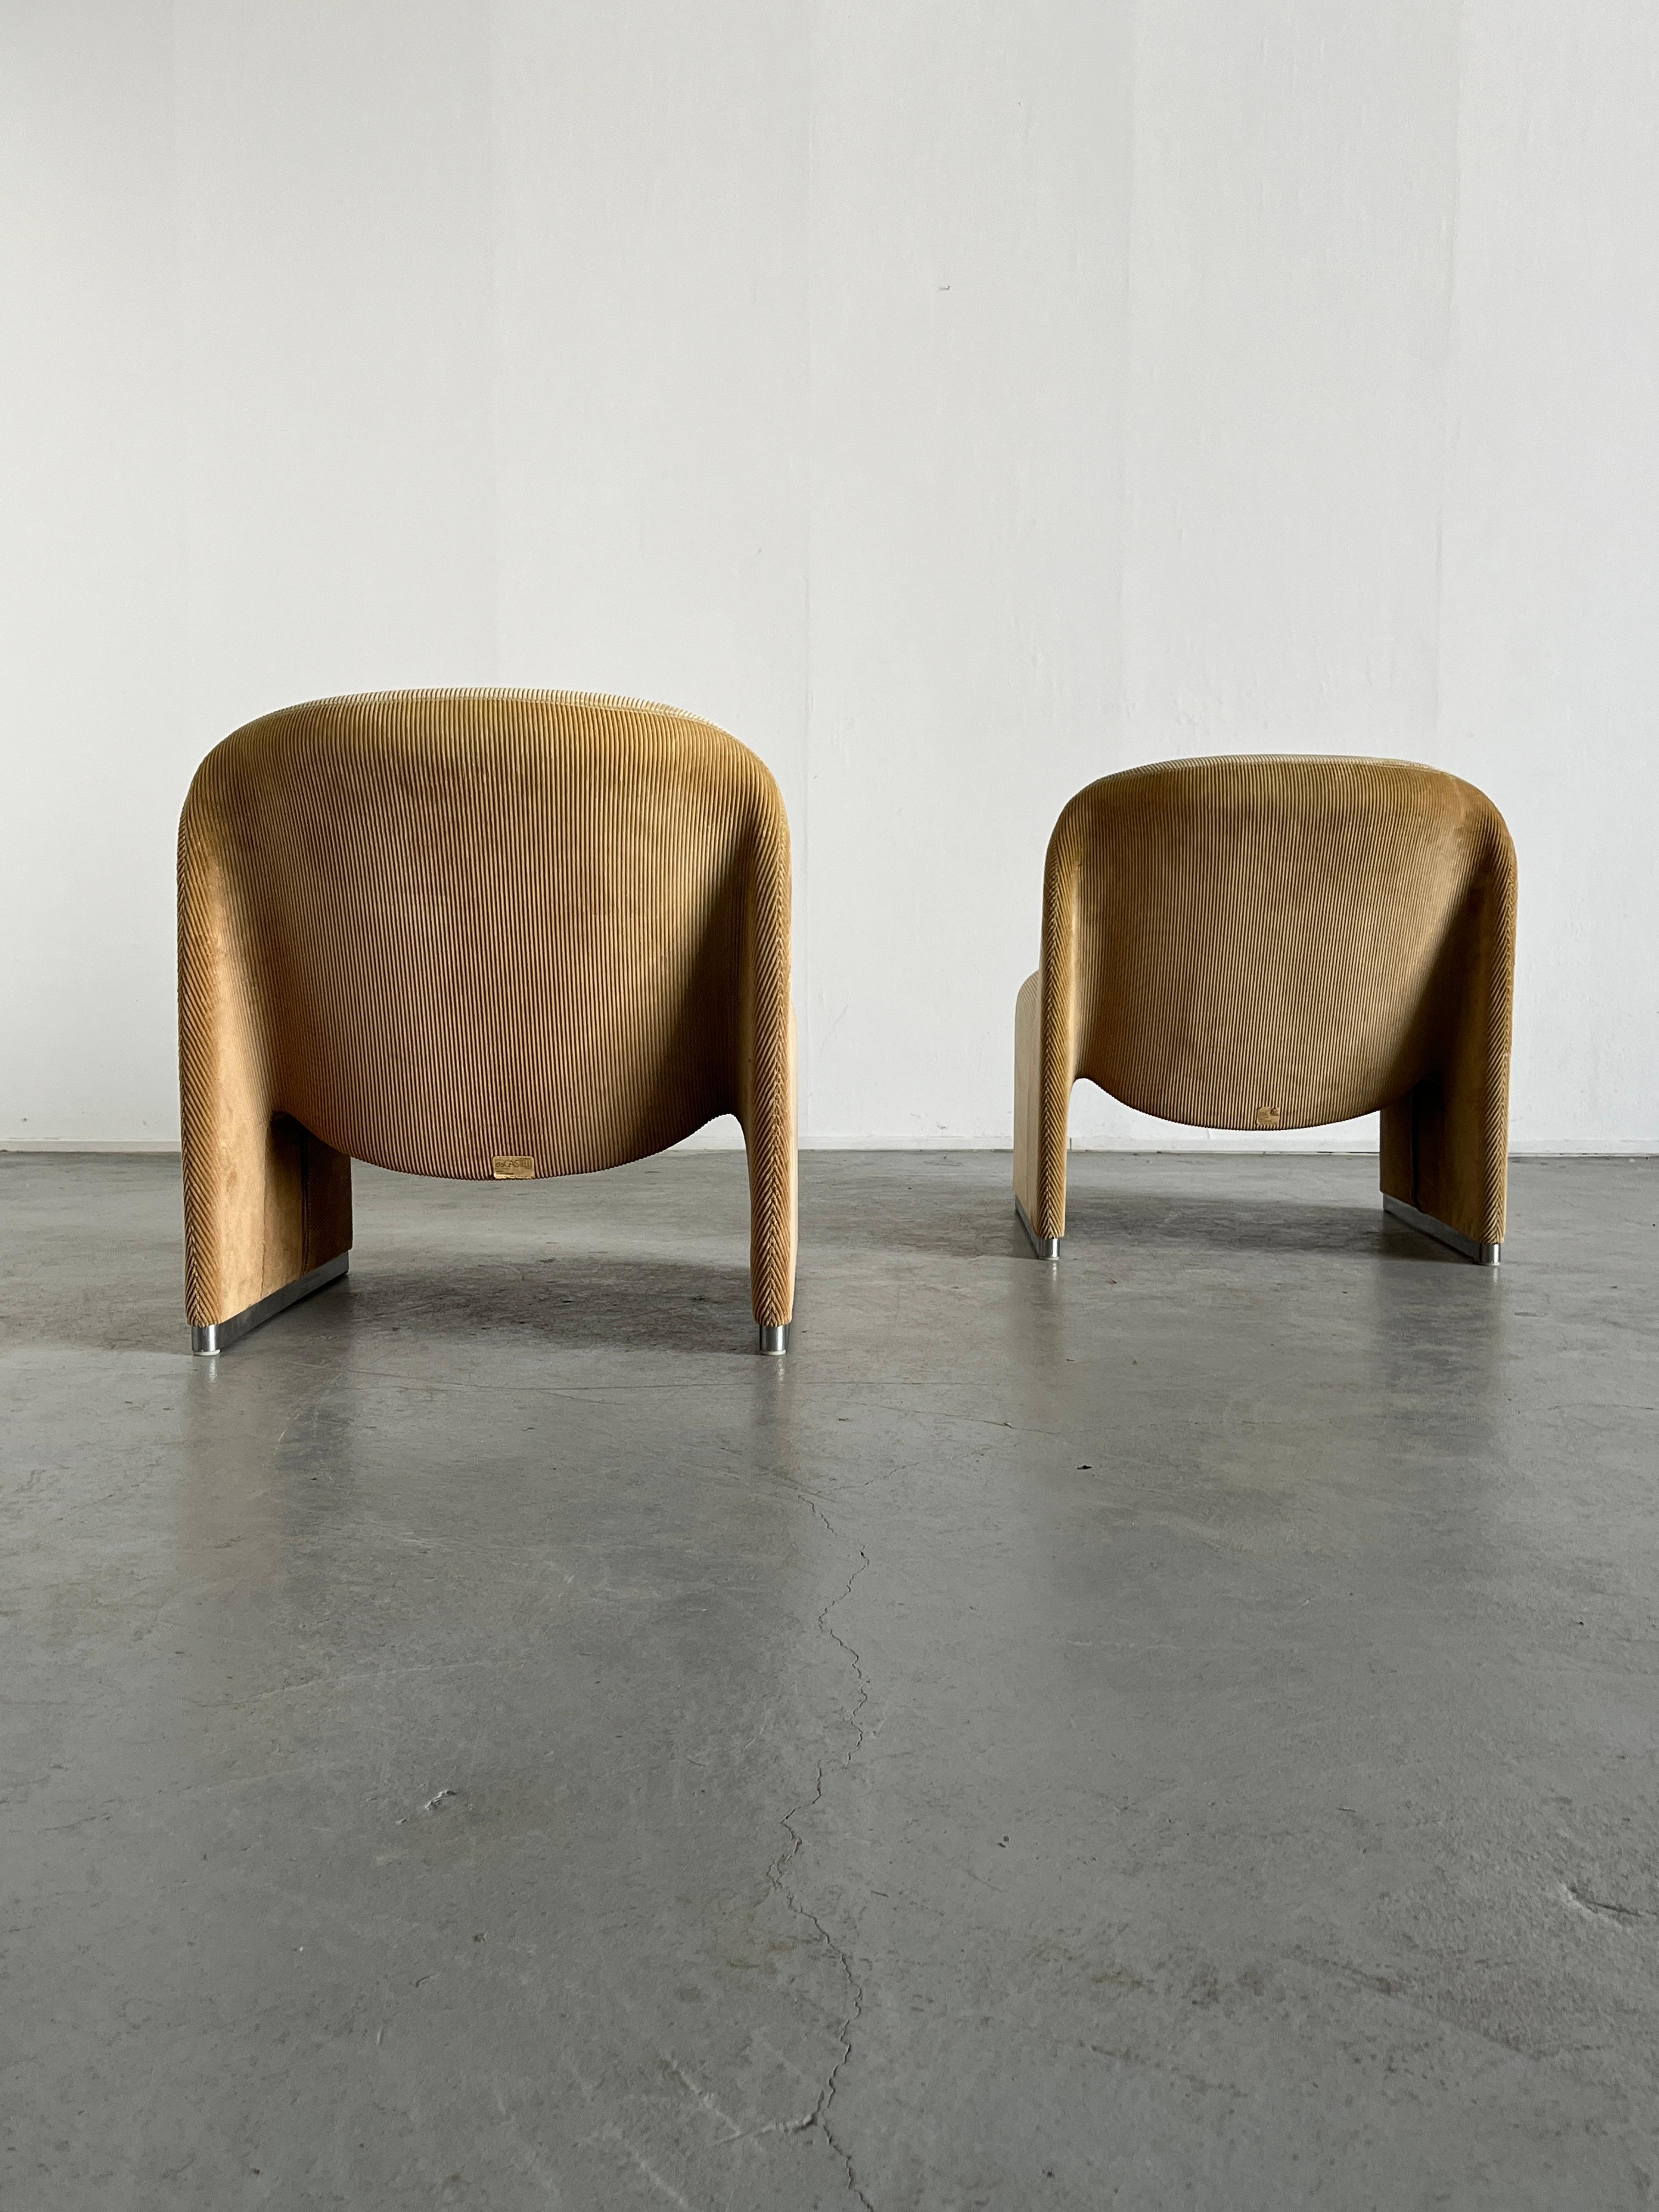 Late 20th Century Pair of Alky Chairs in Beige Corduroy by Giancarlo Piretti for Anonima Castelli